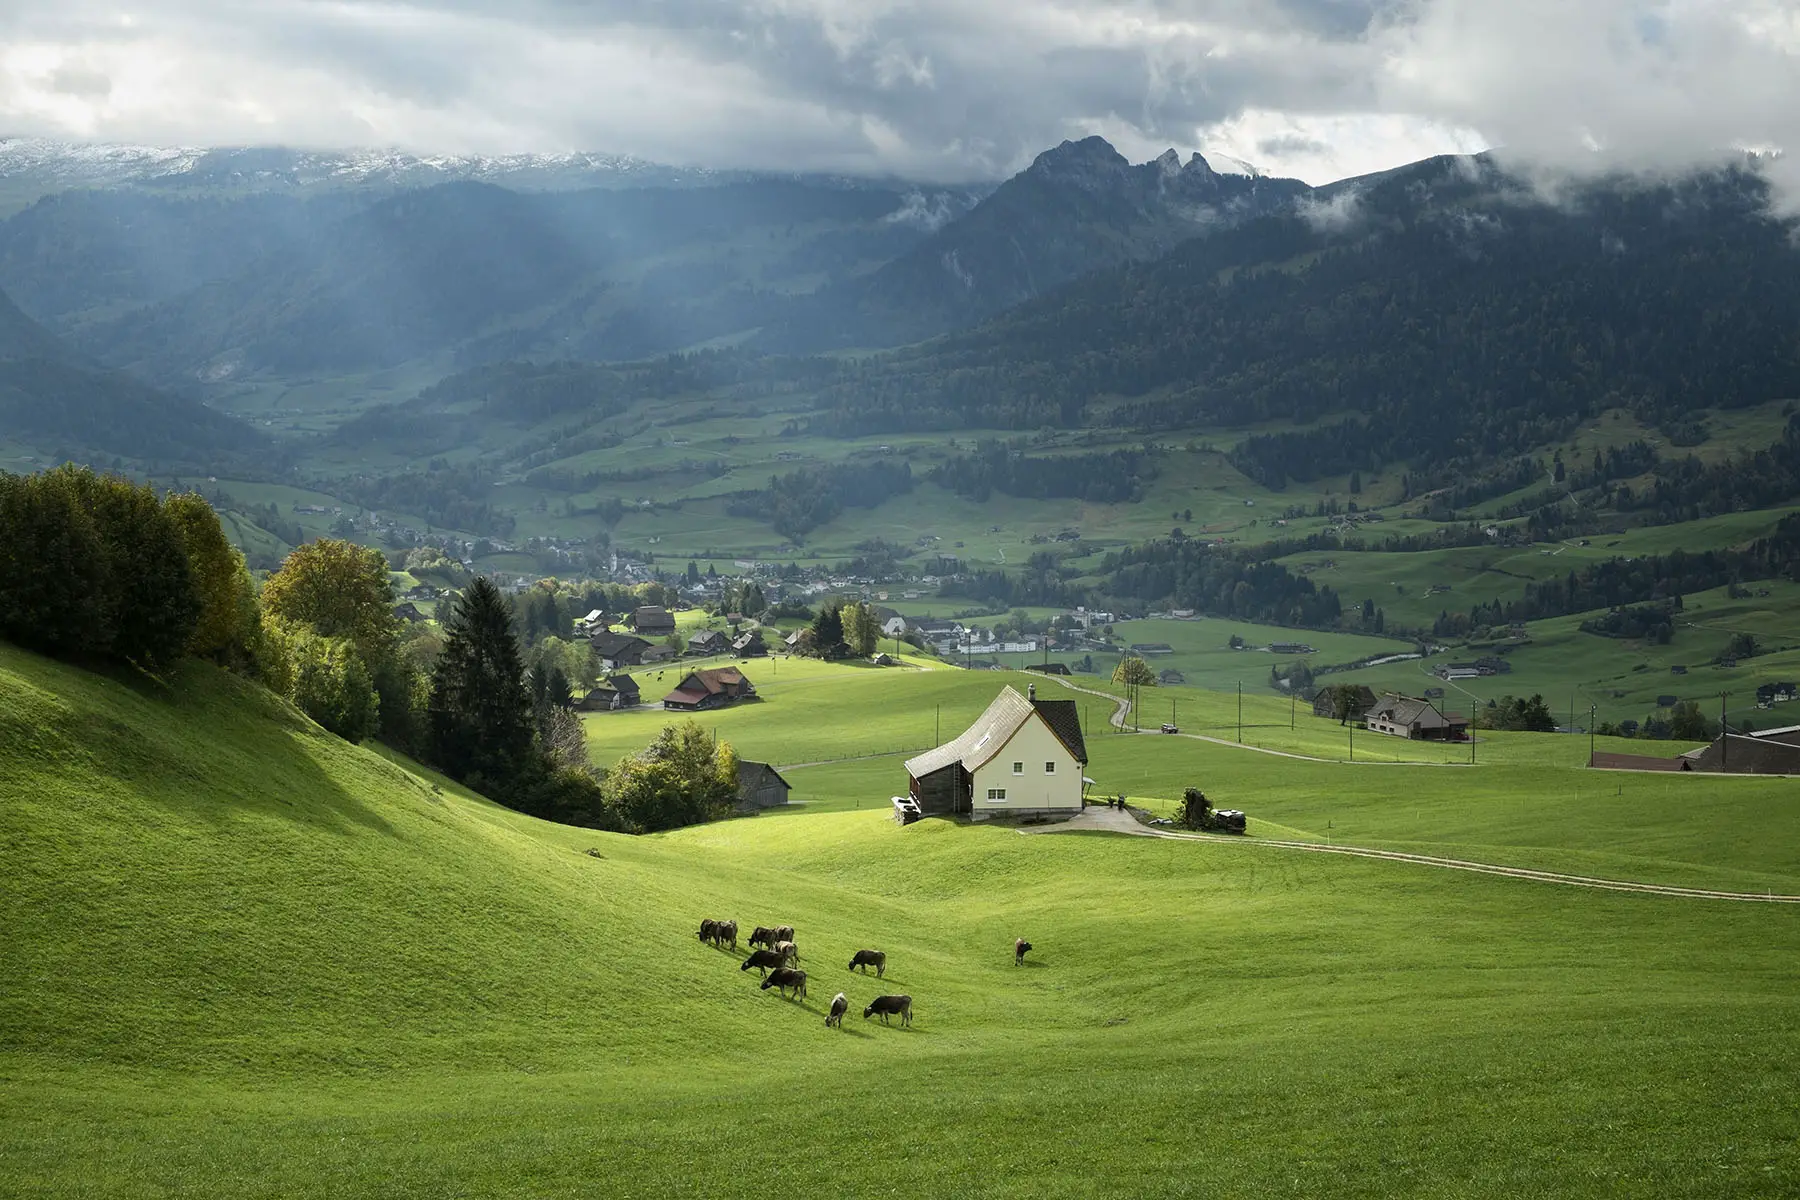 A detached home with cows in a nearby meadow, close by the Swiss alps.